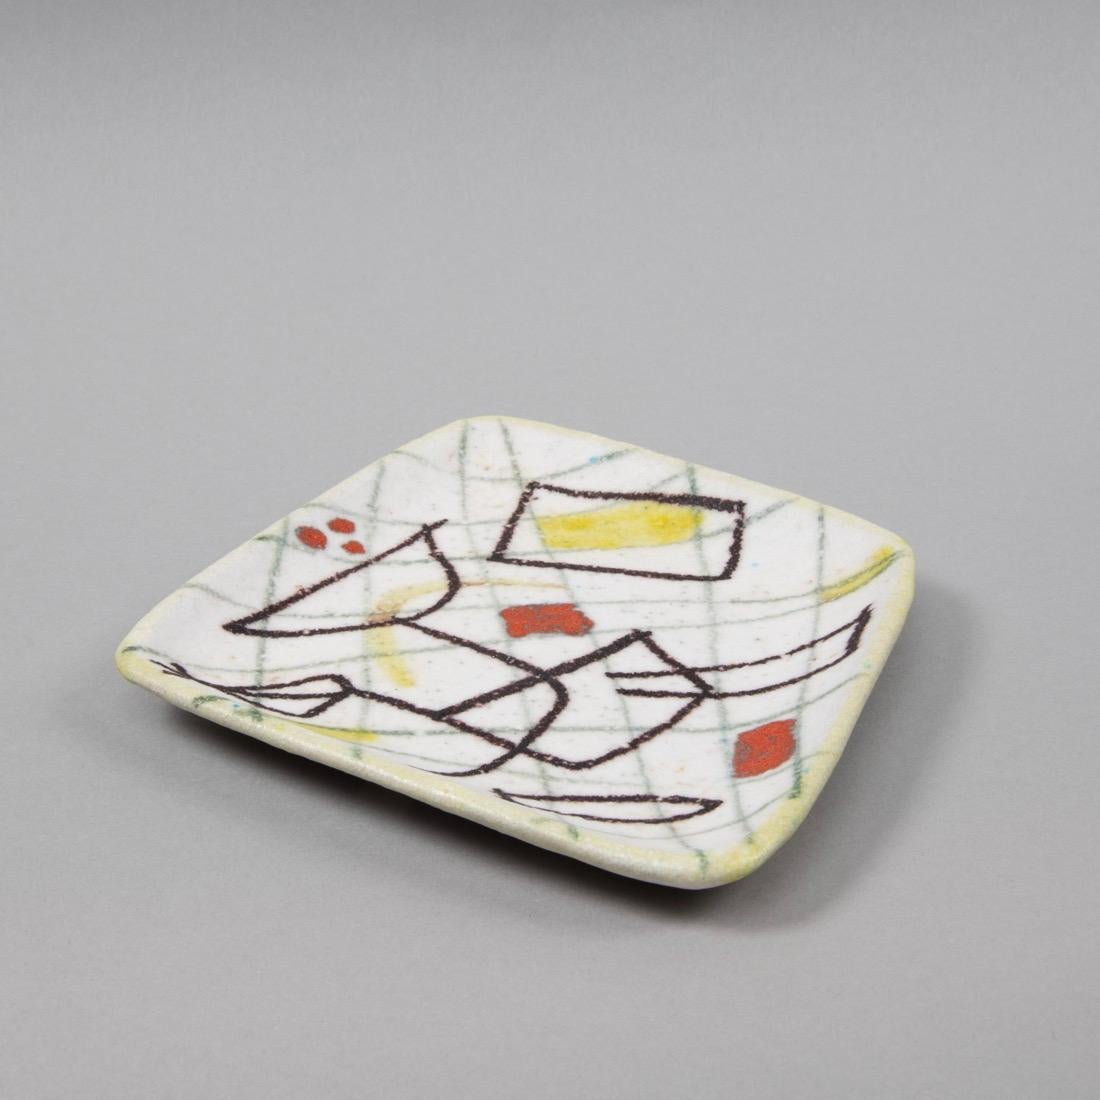 Freeform ceramic plate, hand painted abstract decor in green, yellow, red and black
Signed Guido Gambone and donkey Mark,
circa 1950-1960

About Guido Gambone
Guido Gambone (1909 Montella IT - 1969 Firenze IT) Guido Gambone is considered as one